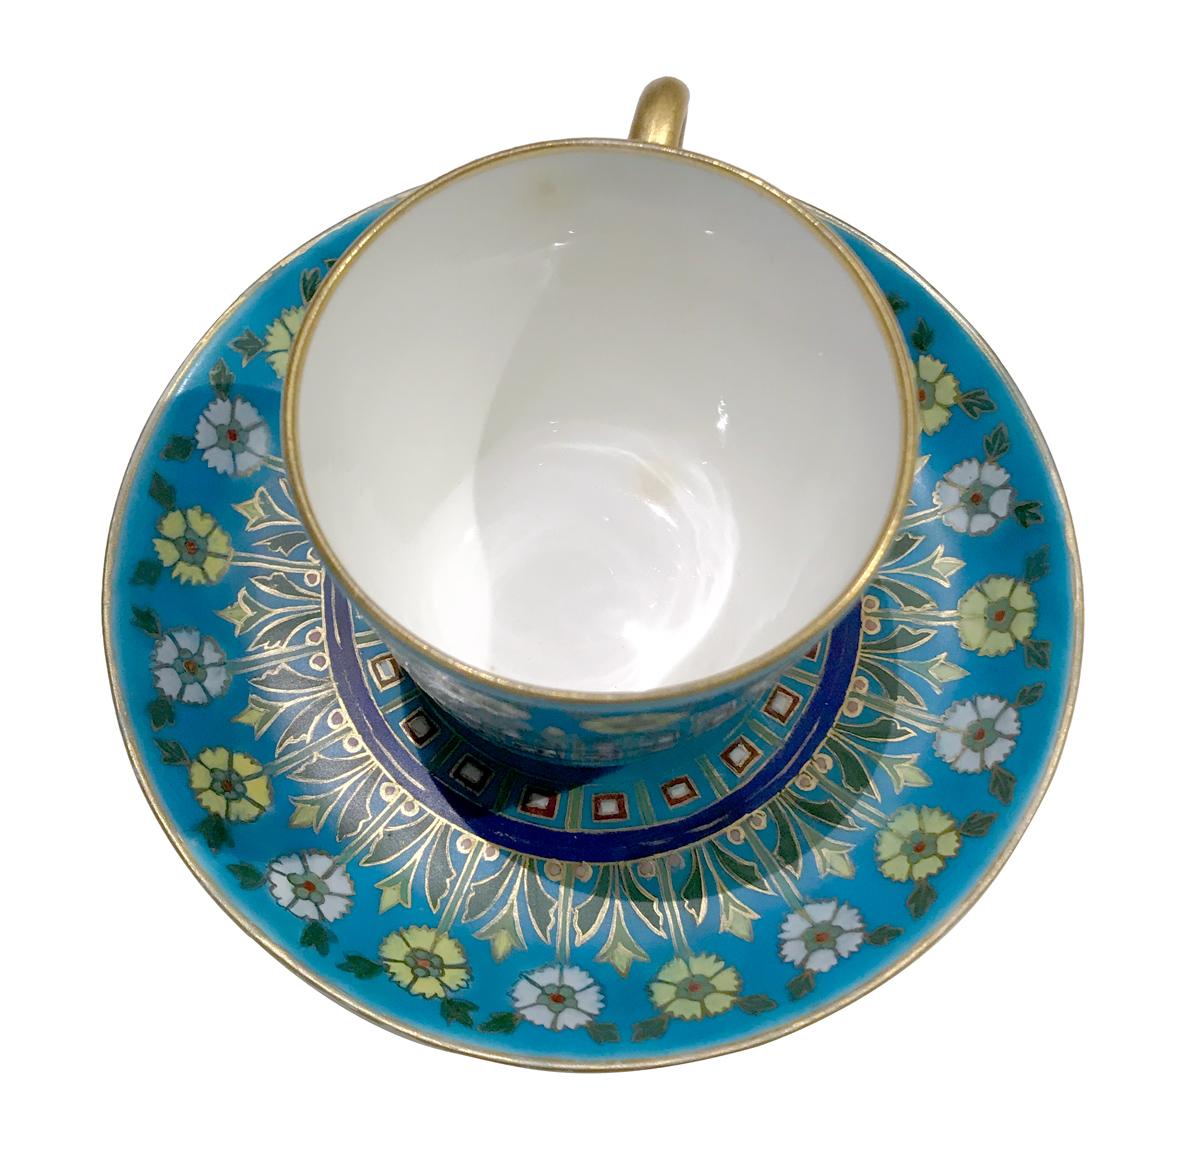 Aesthetic Movement Minton Cloisonné Style Coffee Cup Attributed to Christopher Dresser For Sale